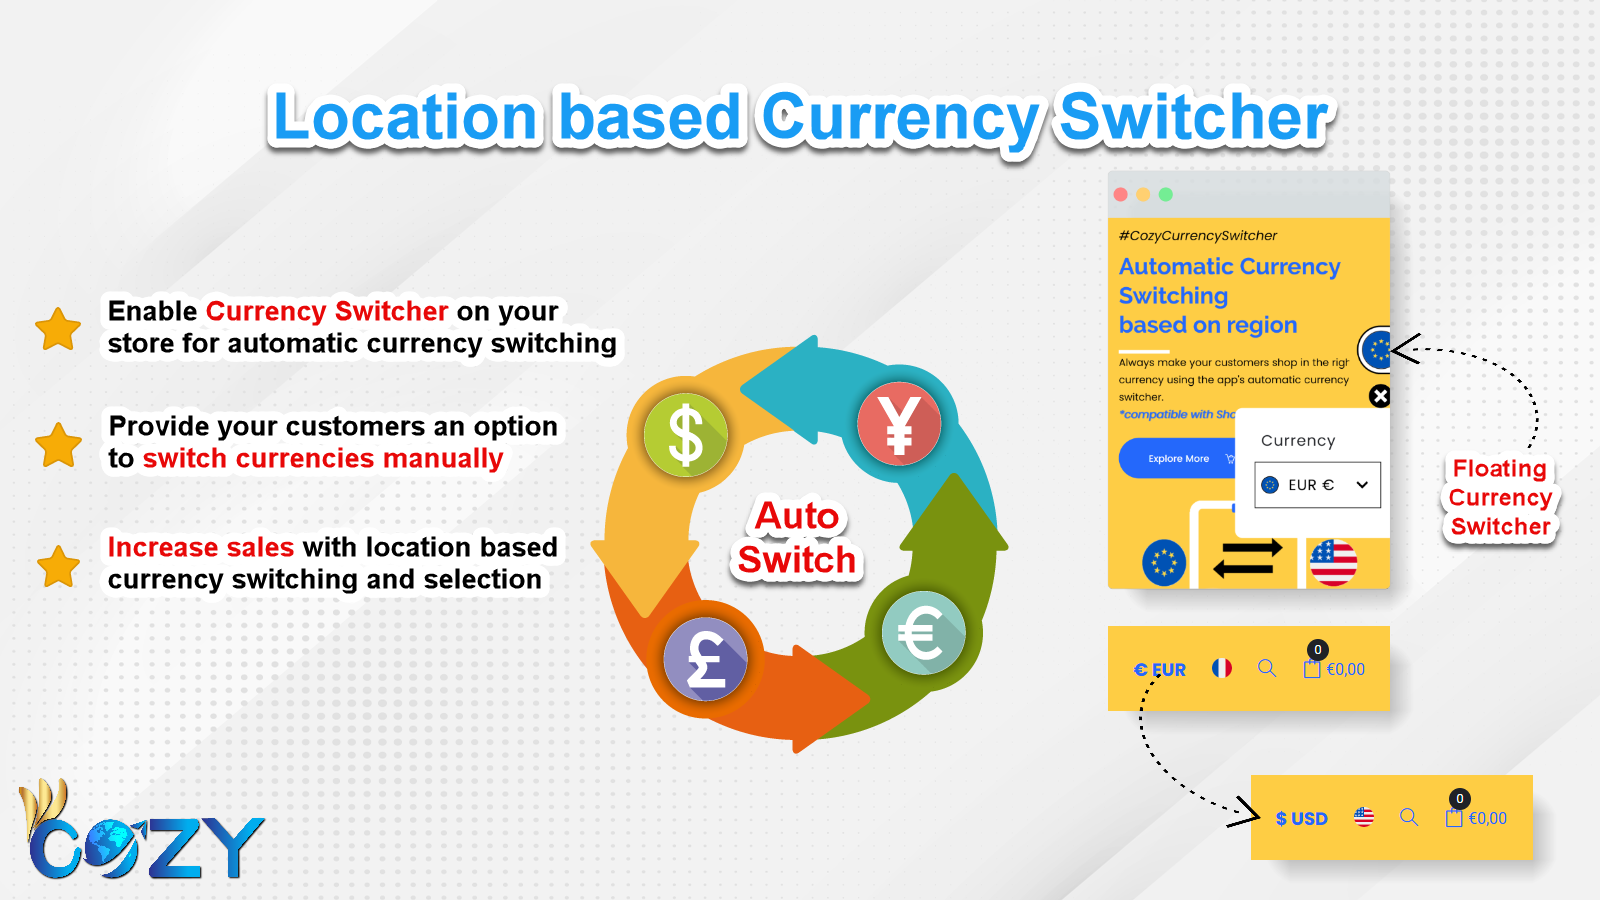 Switch currencies based on location automatically or with popups